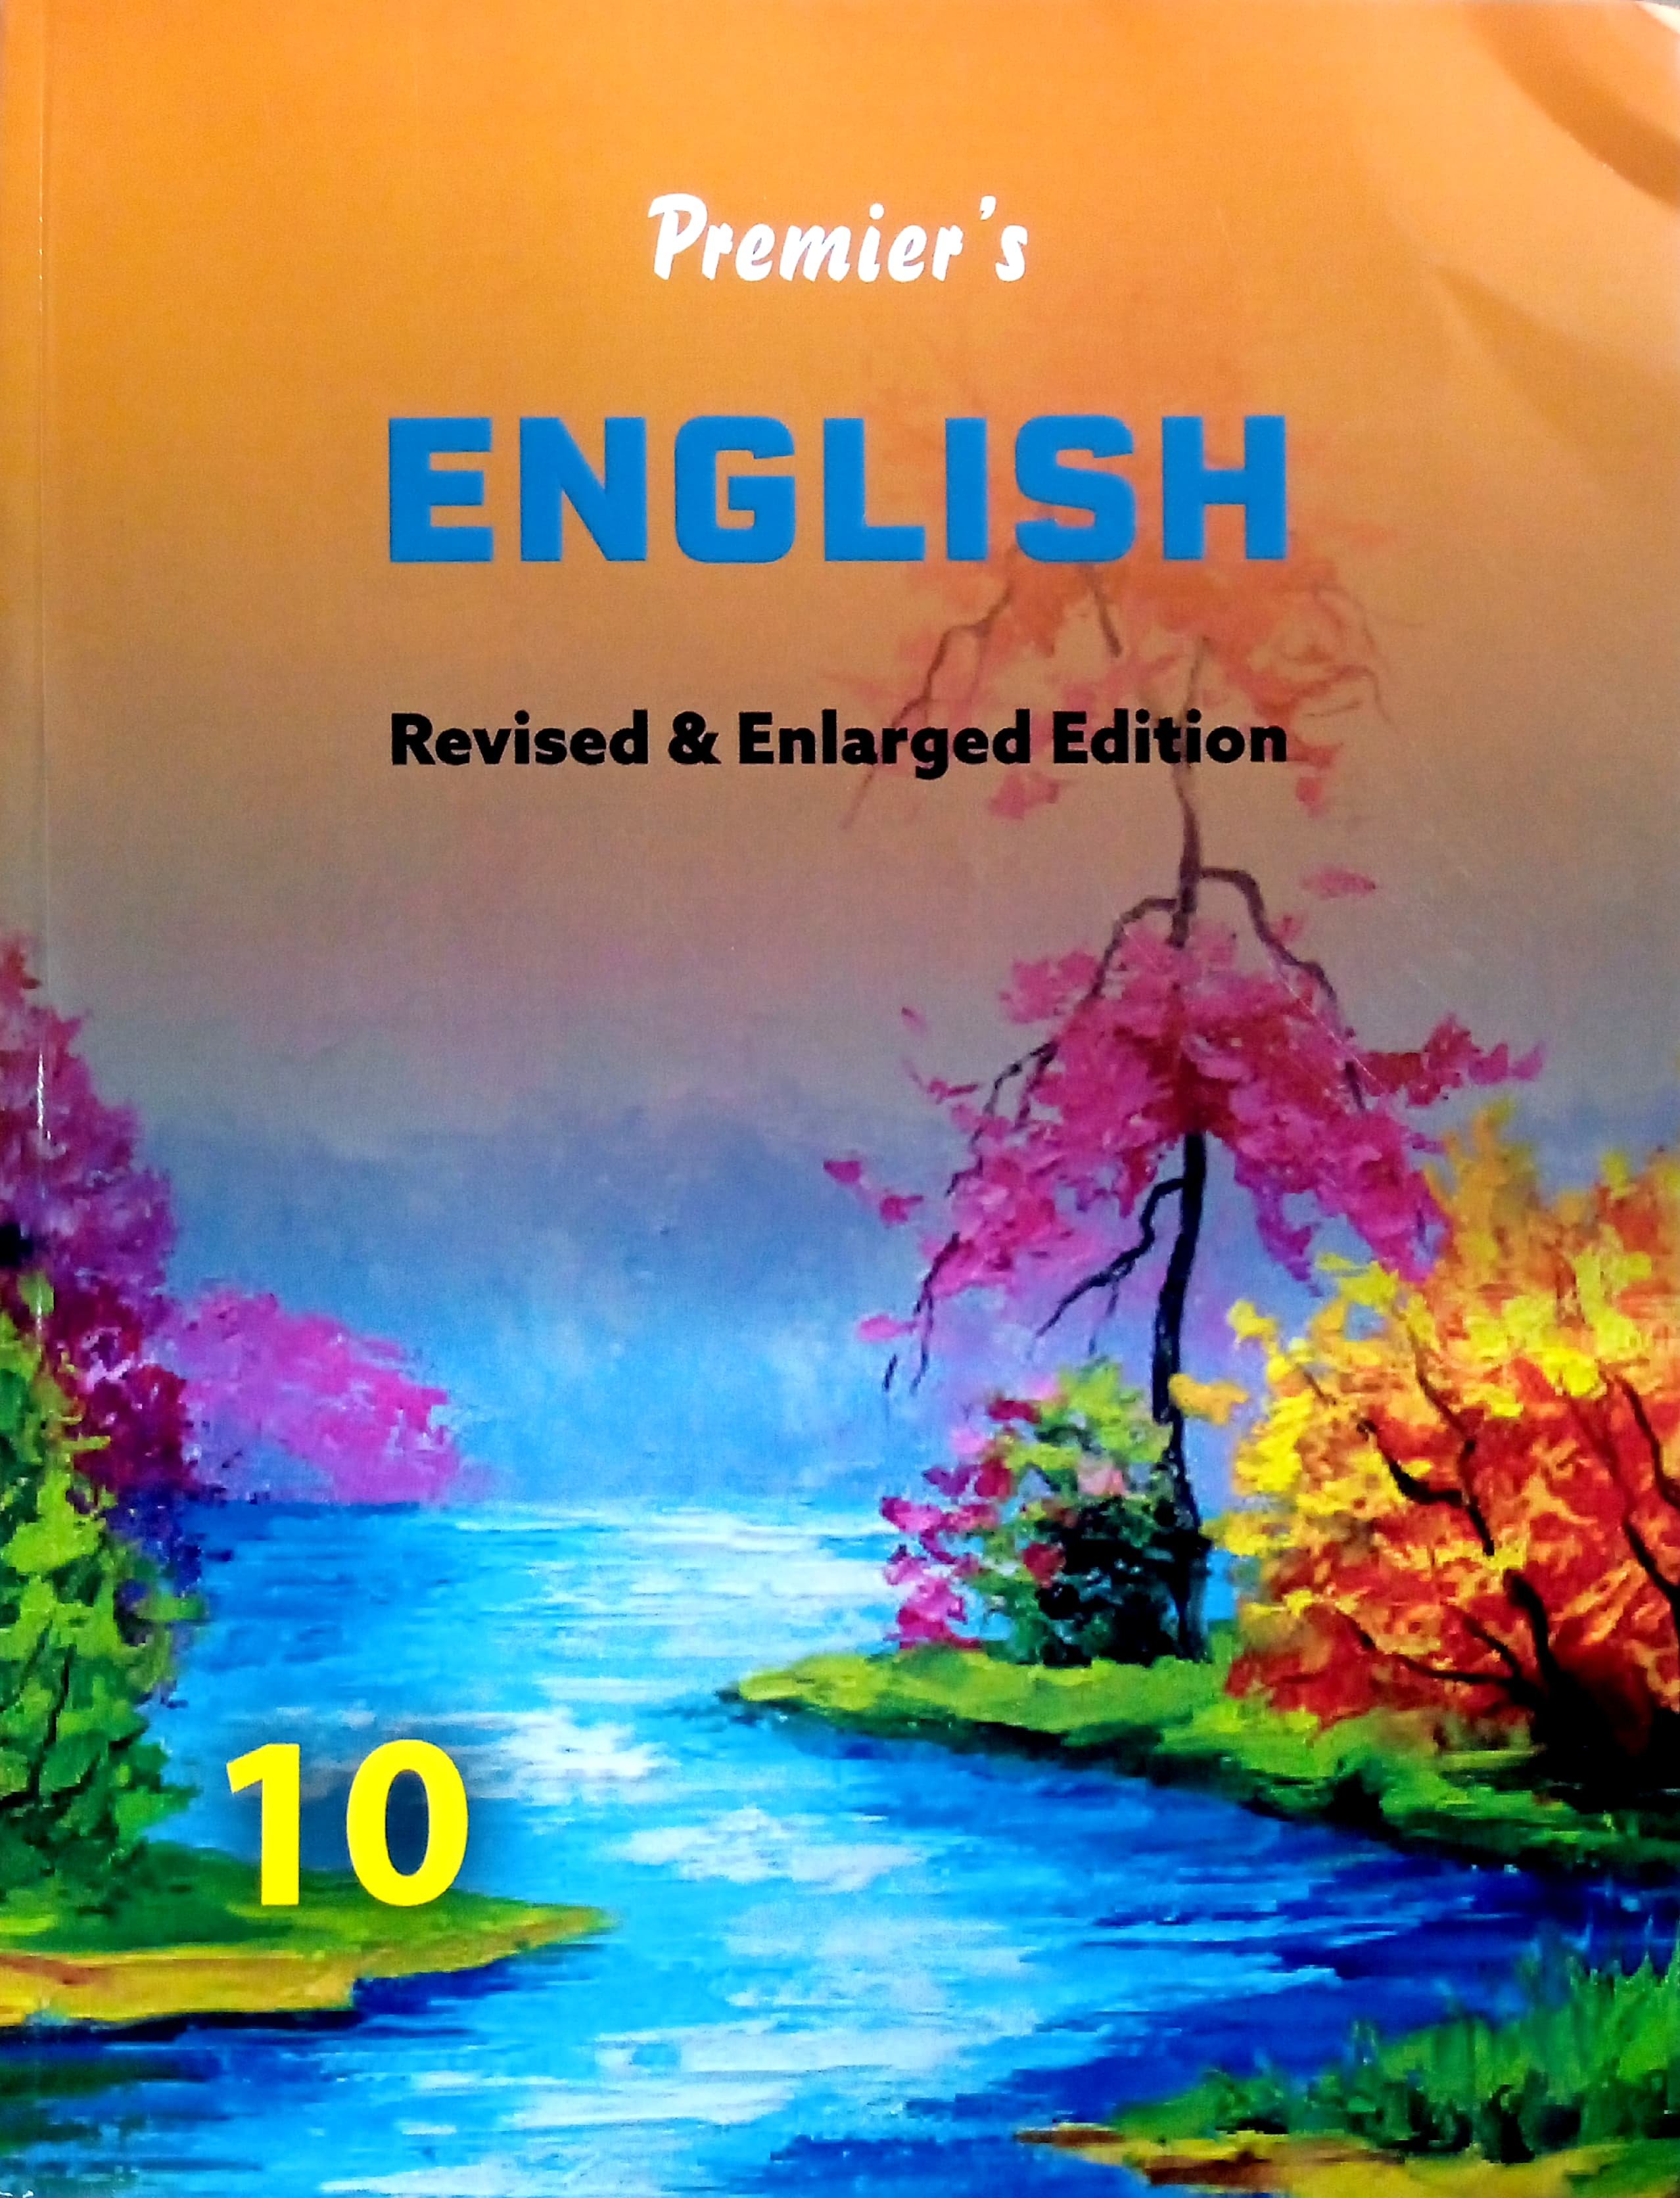 10th english master guide pdf download 2019 action games free download full version windows xp